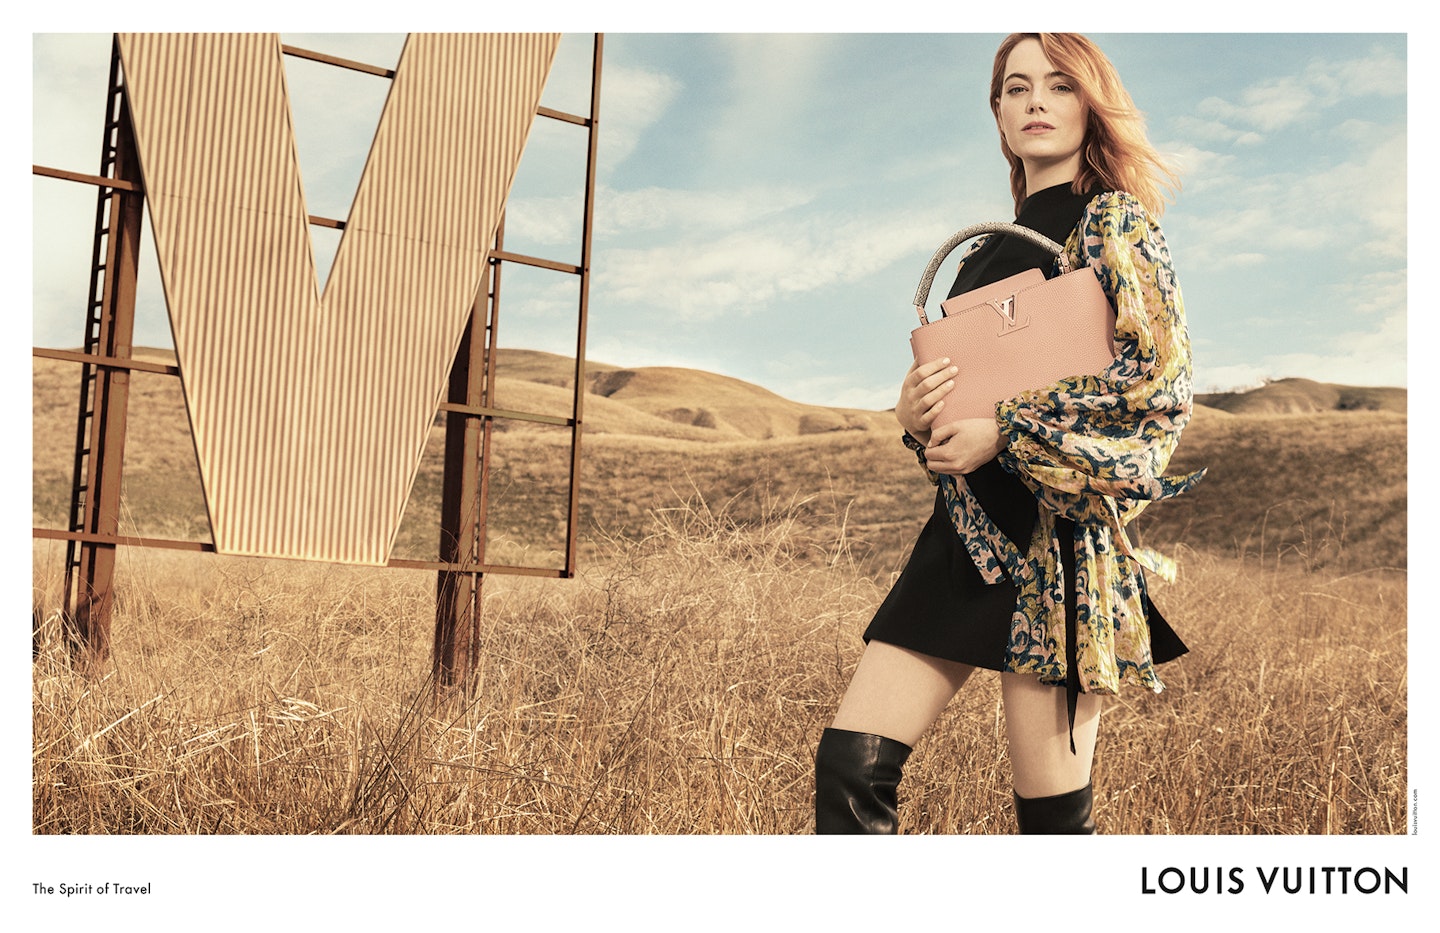 Emma Stone for Louis Vuitton - new face and ambassador for the brand